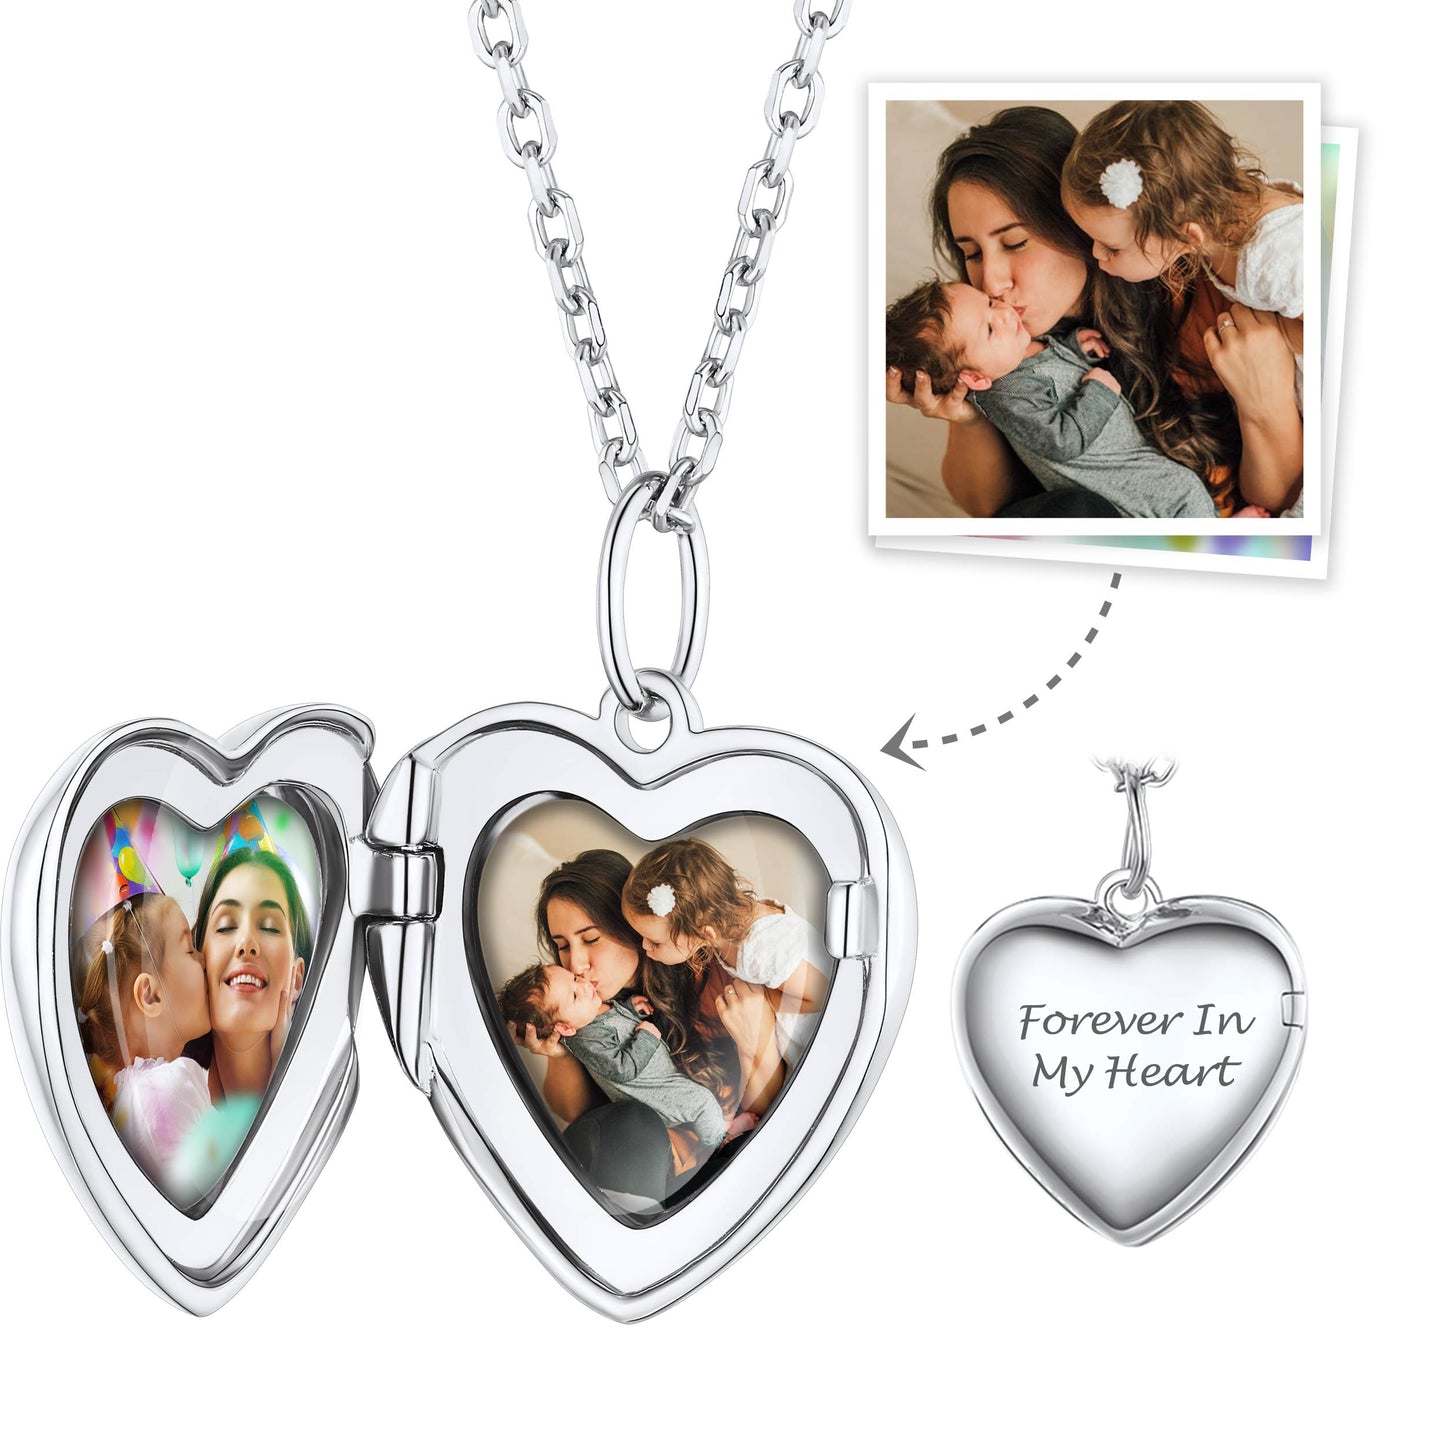 Custom4U Engraved Heart Locket Necklace with 2 Pictures For Women